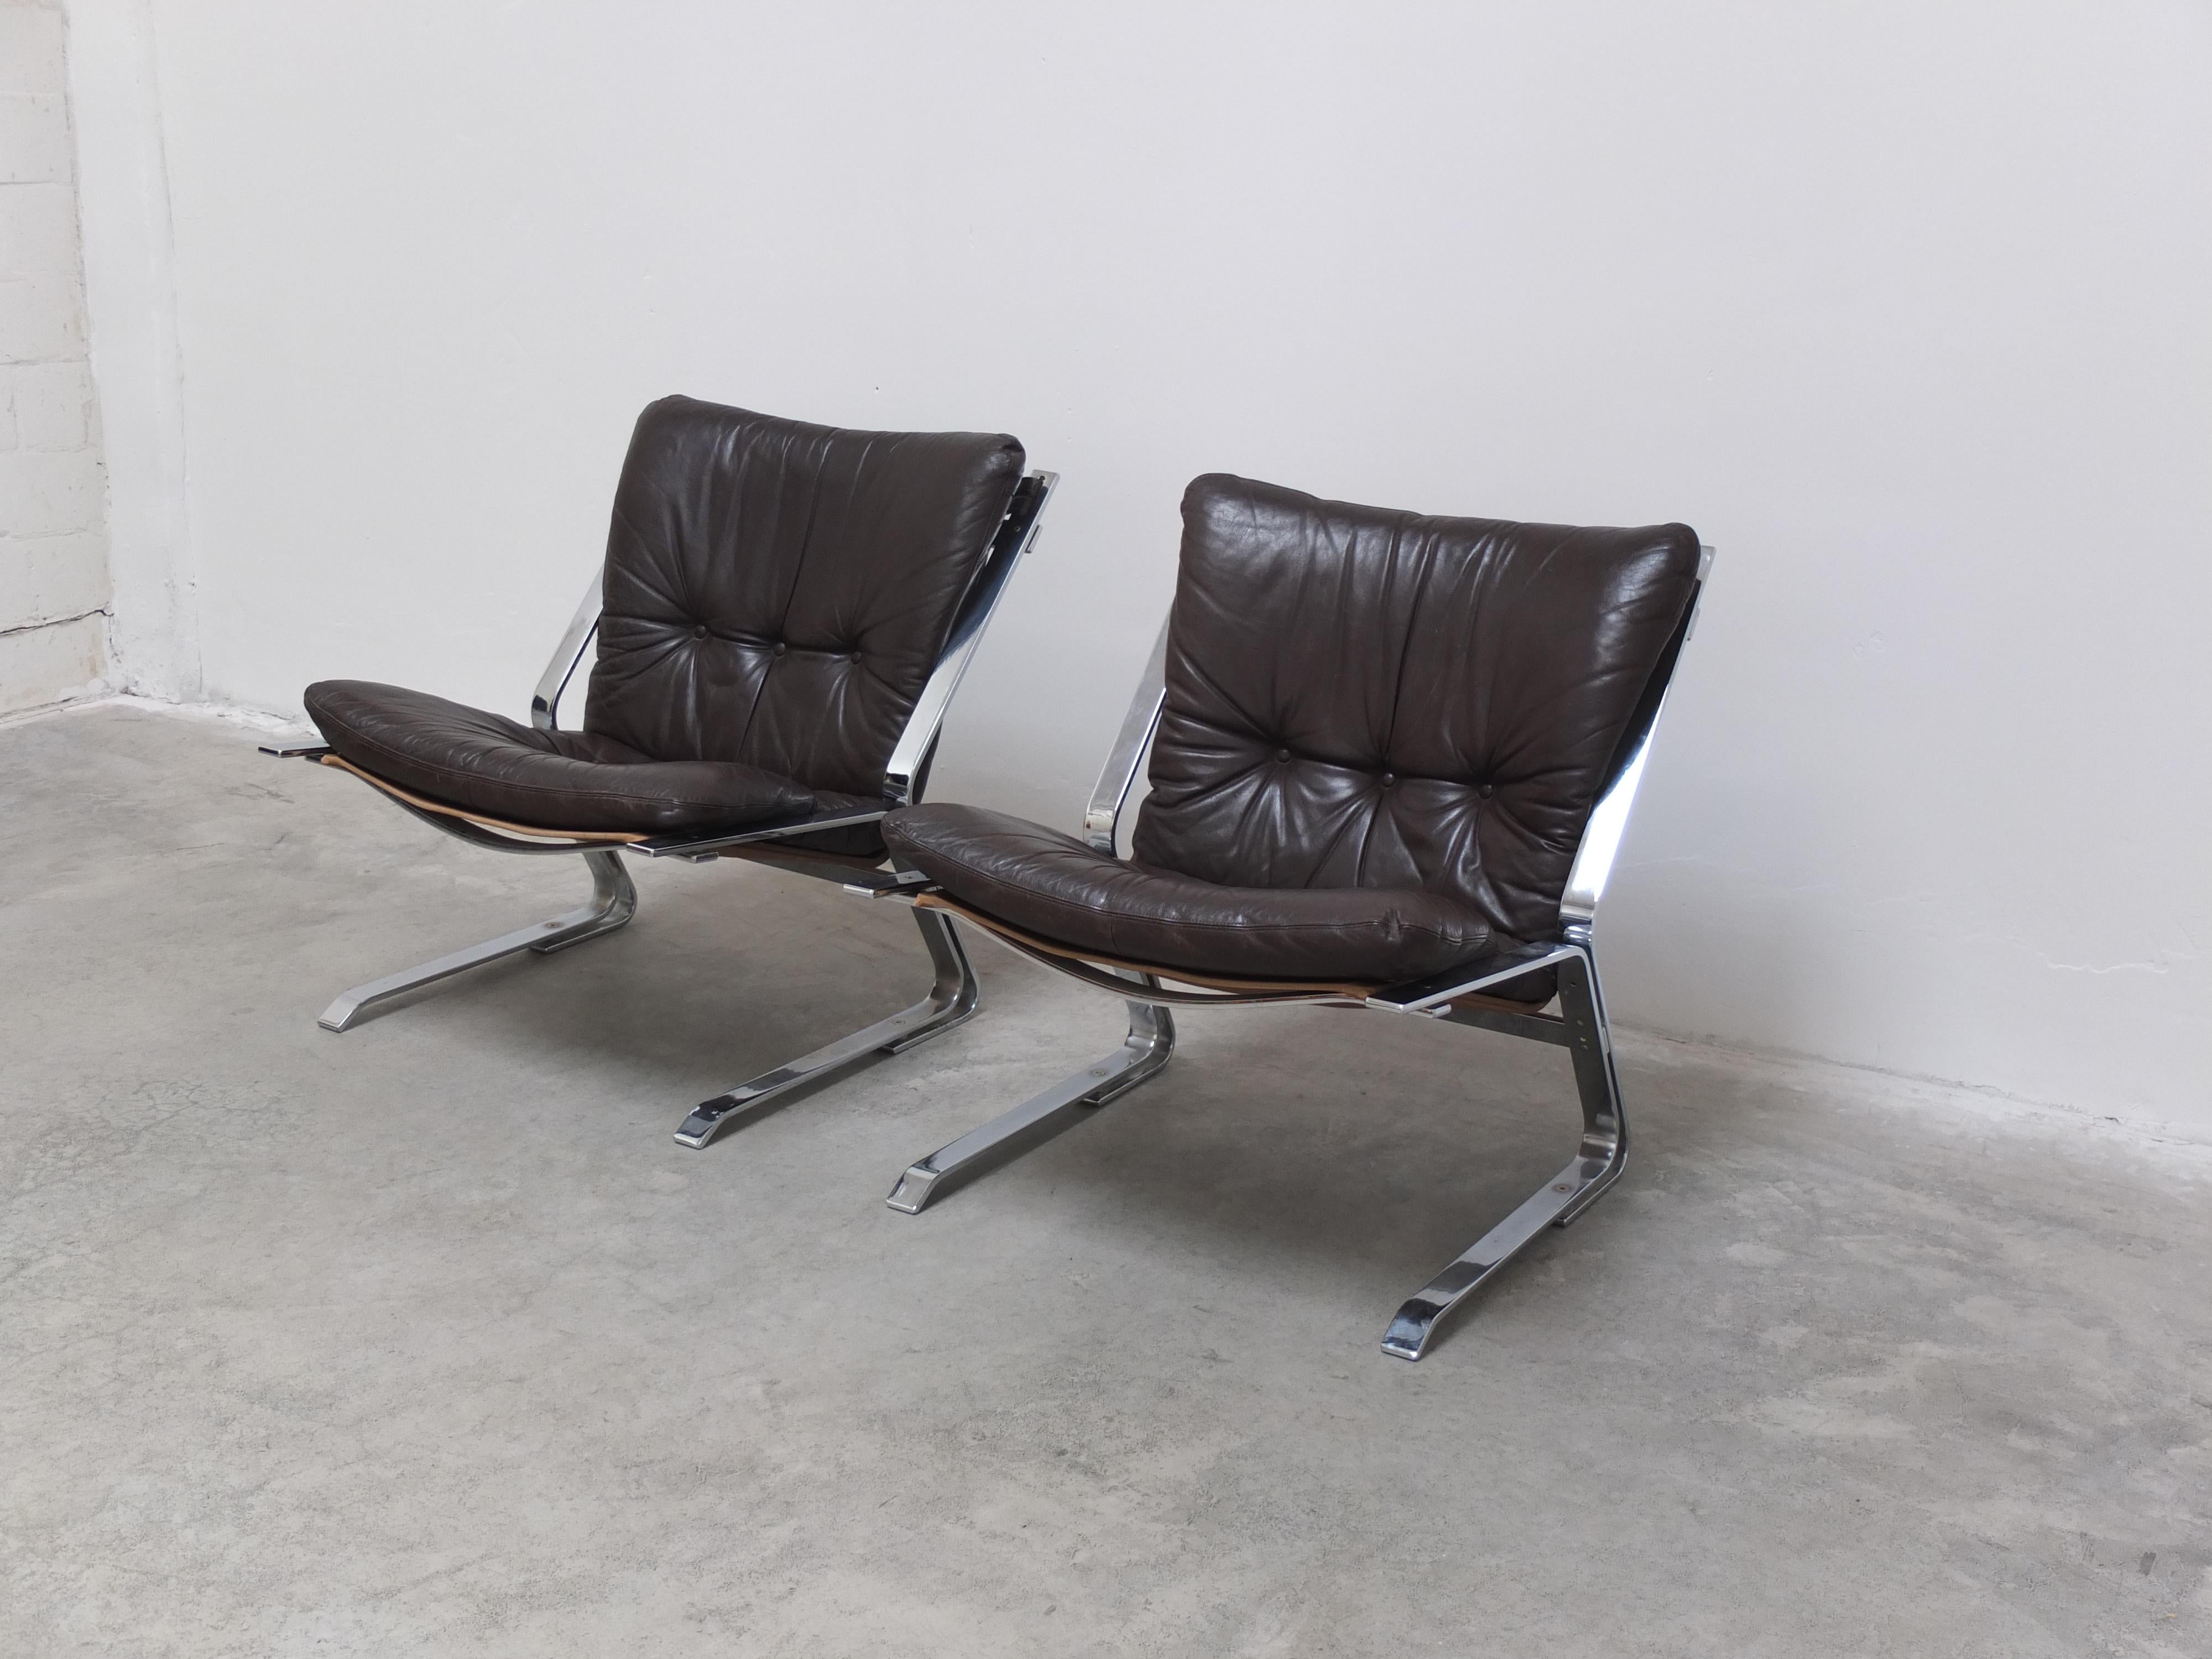 Scandinavian Modern Rare Pair of 'Pirate' Lounge Chairs by Elsa & Nordahl Solheim for Rykken, 1960s For Sale